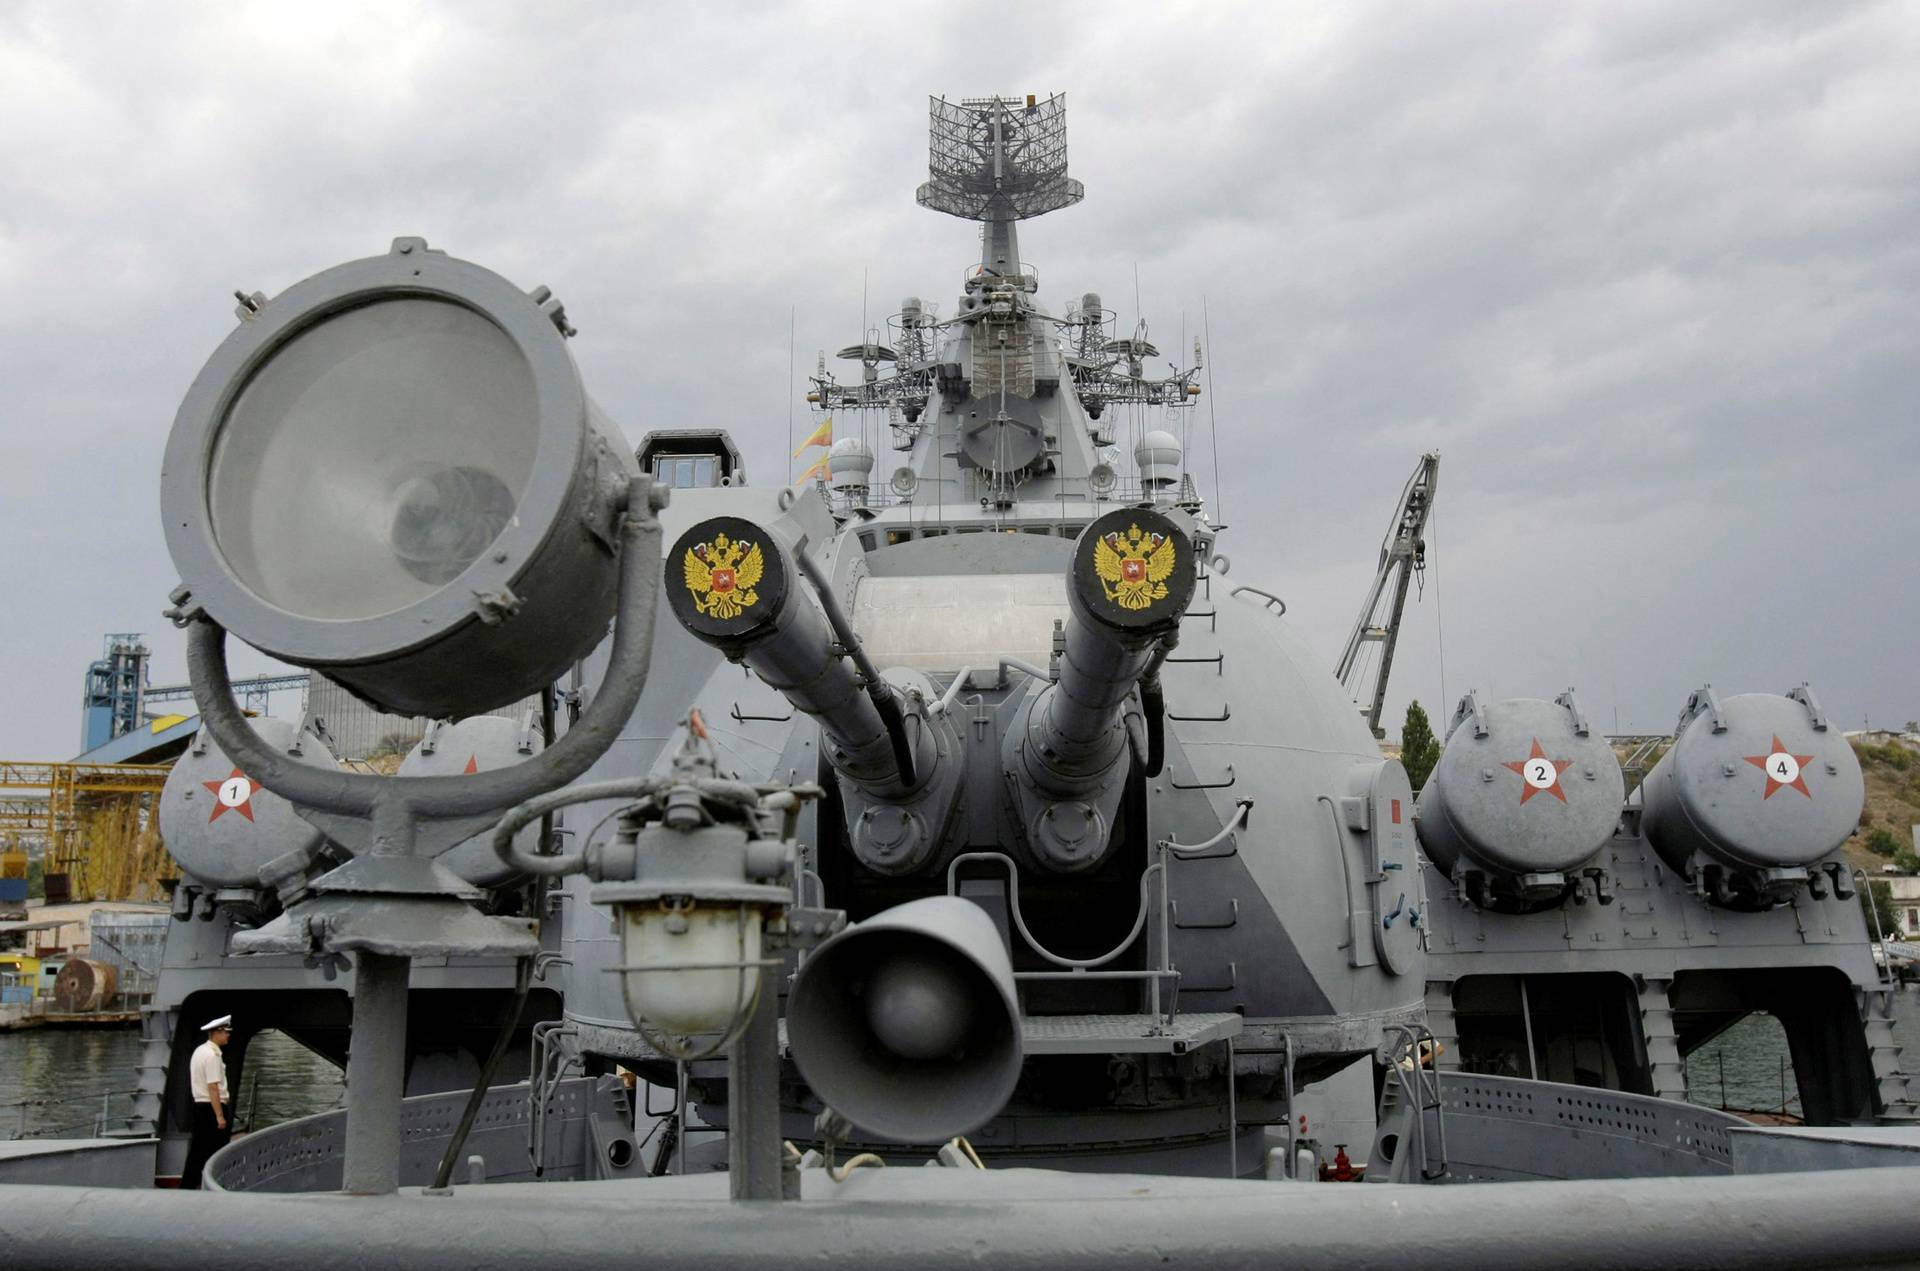 FILE PHOTO: Russia's coat of arms, the double headed eagle, is seen on covers of the missile cruiser Moskva in the Ukrainian Black Sea port of Sevastopol